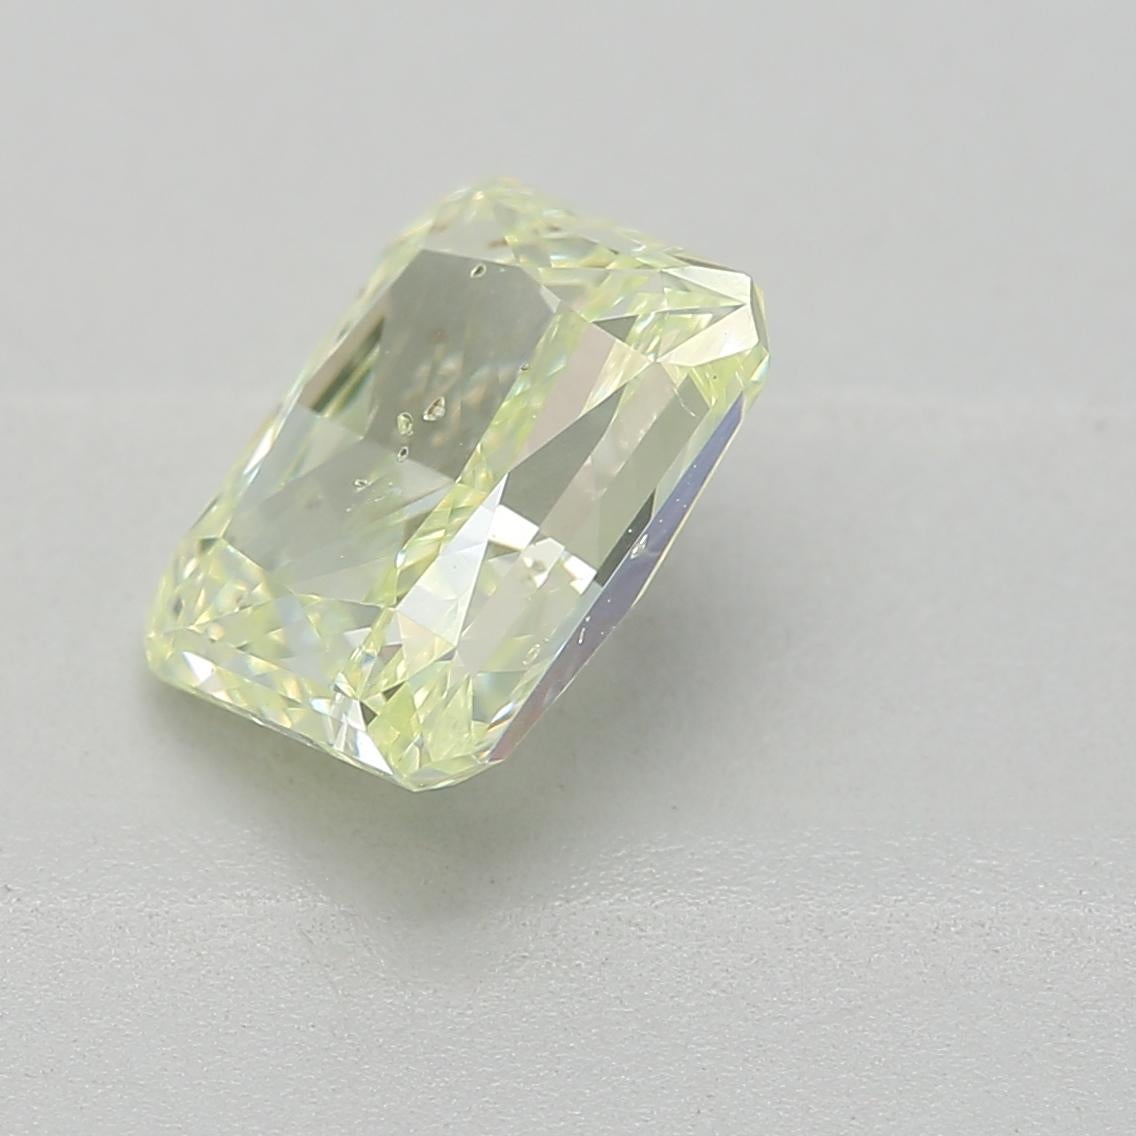 *100% NATURAL FANCY COLOUR DIAMOND*

✪ Diamond Details ✪

➛ Shape: Radiant
➛ Colour Grade: Fancy Yellow Green 
➛ Carat: 1.11
➛ Clarity: SI2
➛ GIA Certified 

^FEATURES OF THE DIAMOND^

This 1.11 carat diamond refers to the weight of the diamond.